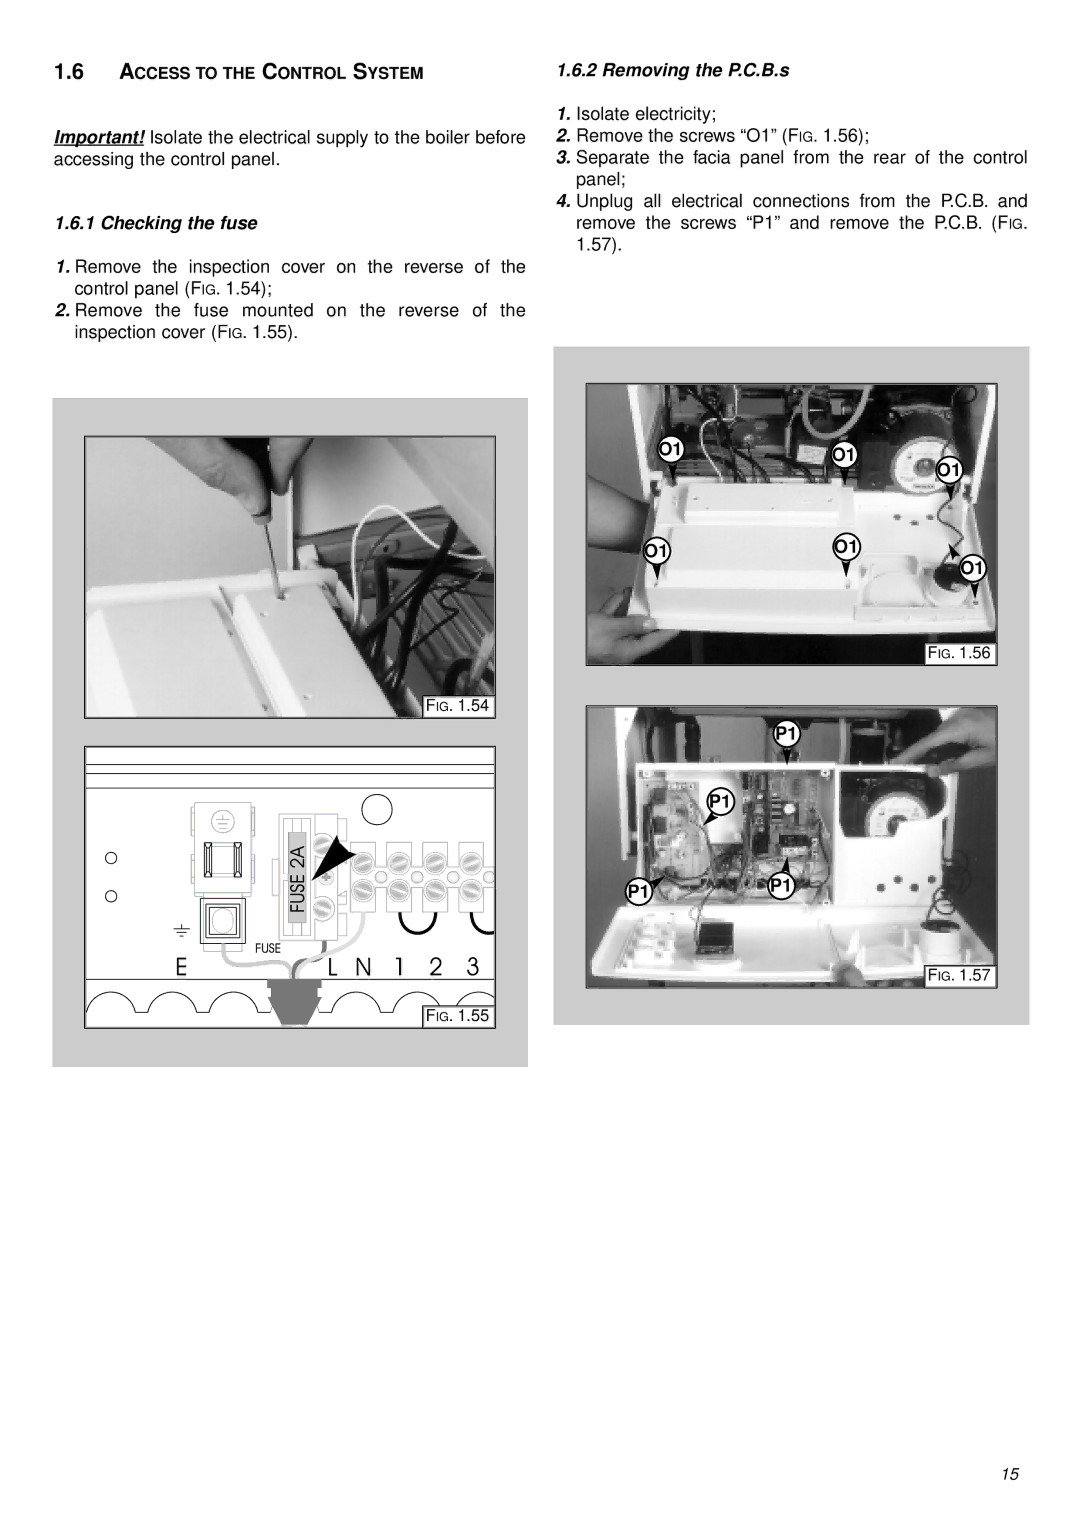 Ariston 41-116-04 installation instructions Checking the fuse, Removing the P.C.B.s, Access to the Control System 